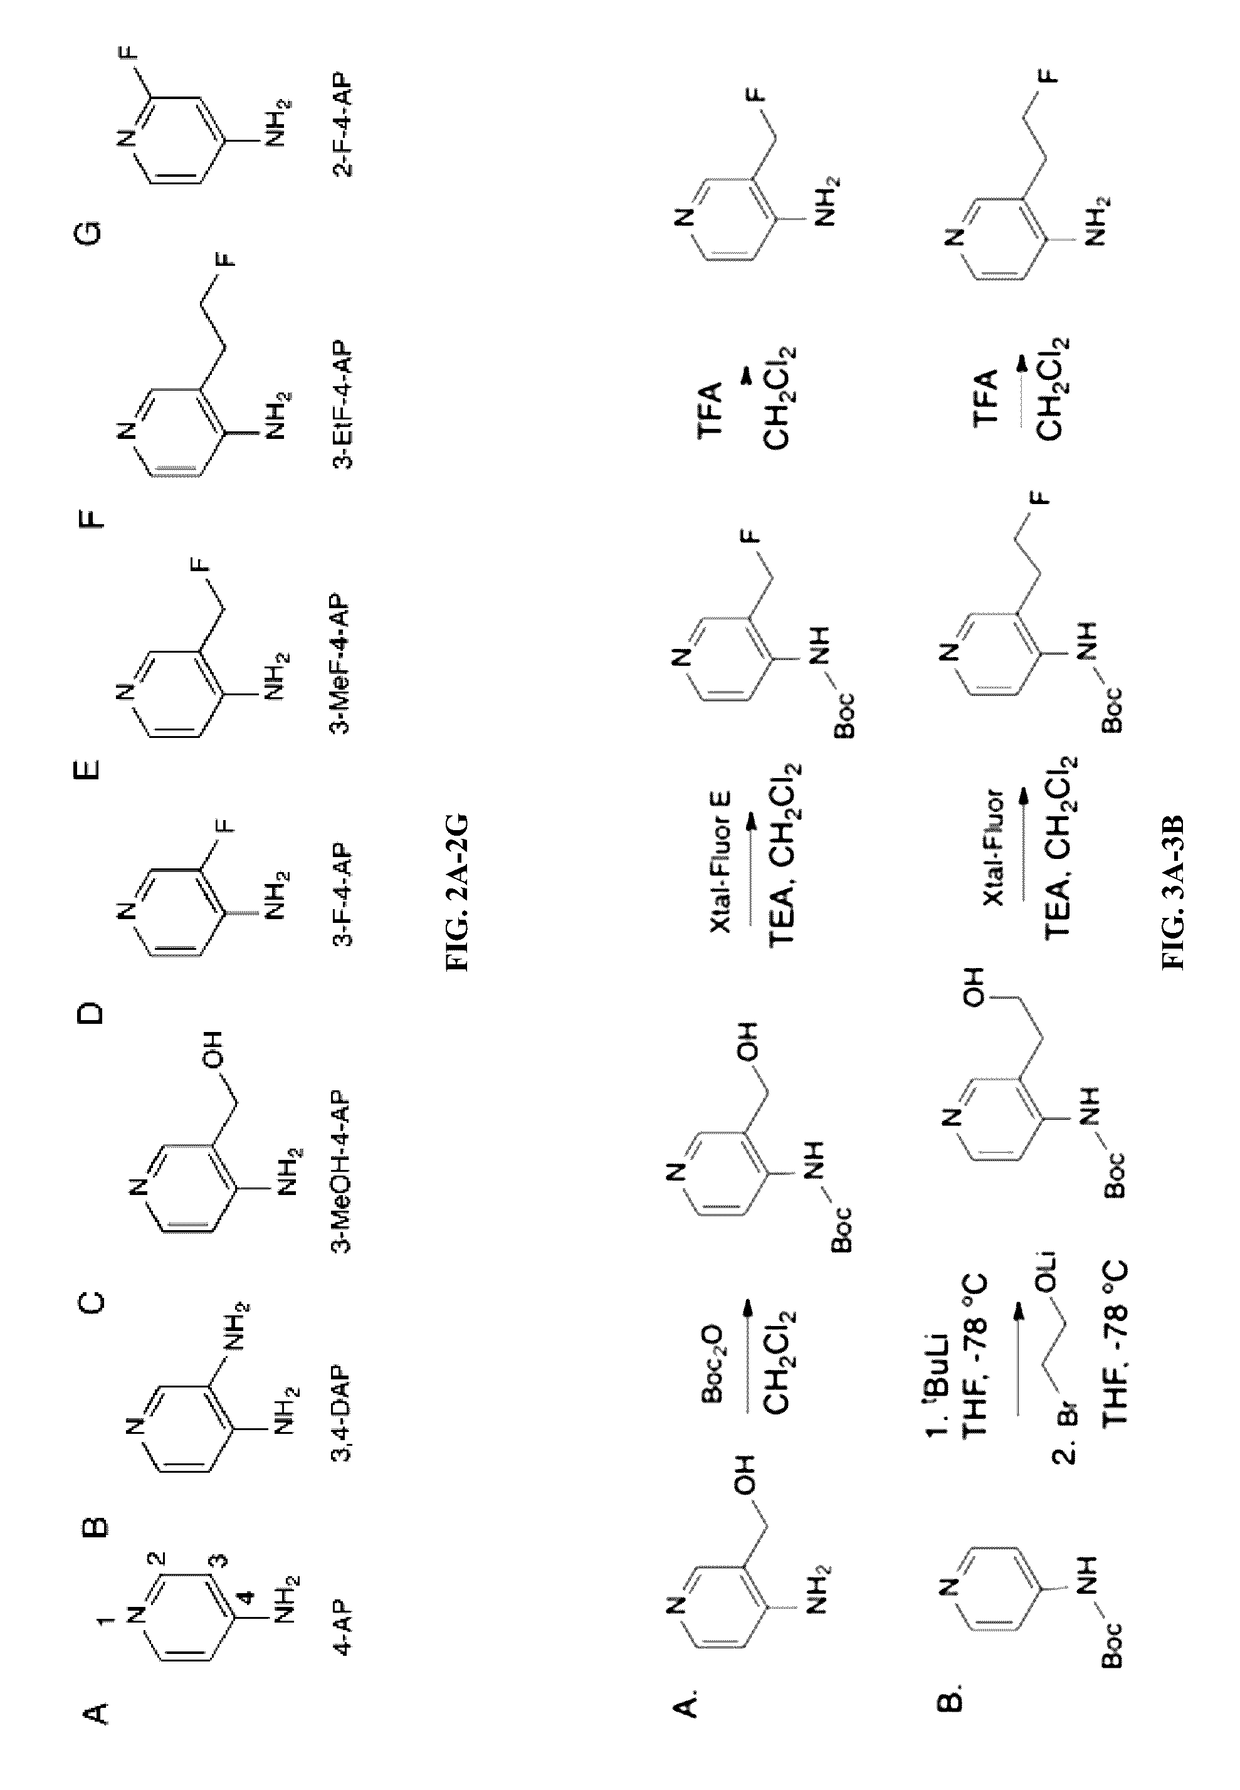 Use of fluorinated derivatives of 4-aminopyridine in therapeutics and medical imaging